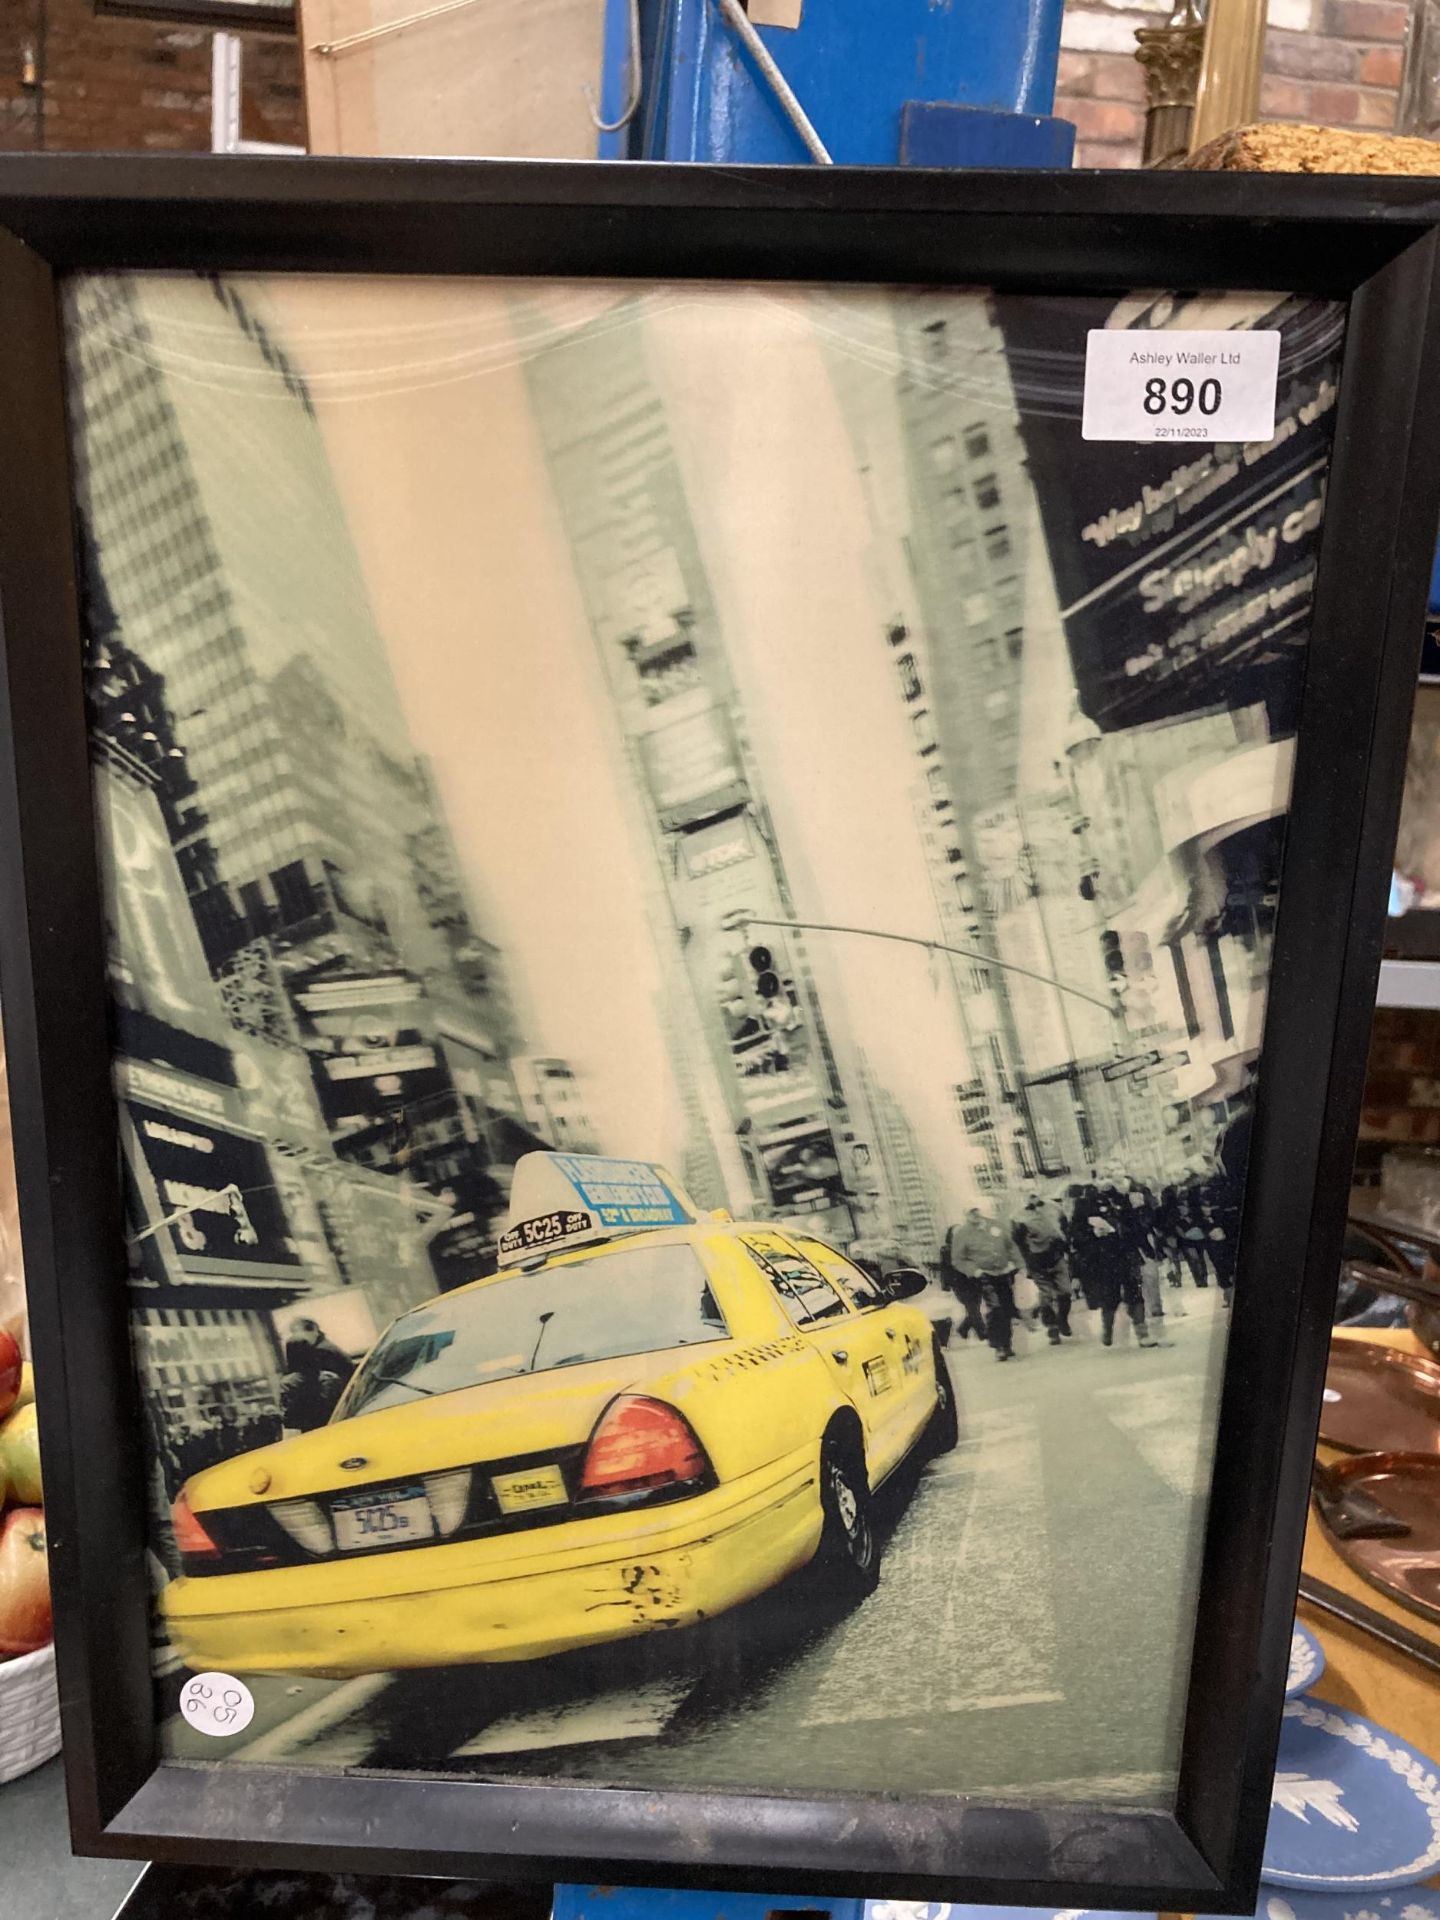 TWO HOLOGRAM PICTURES, 'NEW YORK TAXI' AND 'THE OTHER WOMAN' - Image 2 of 3